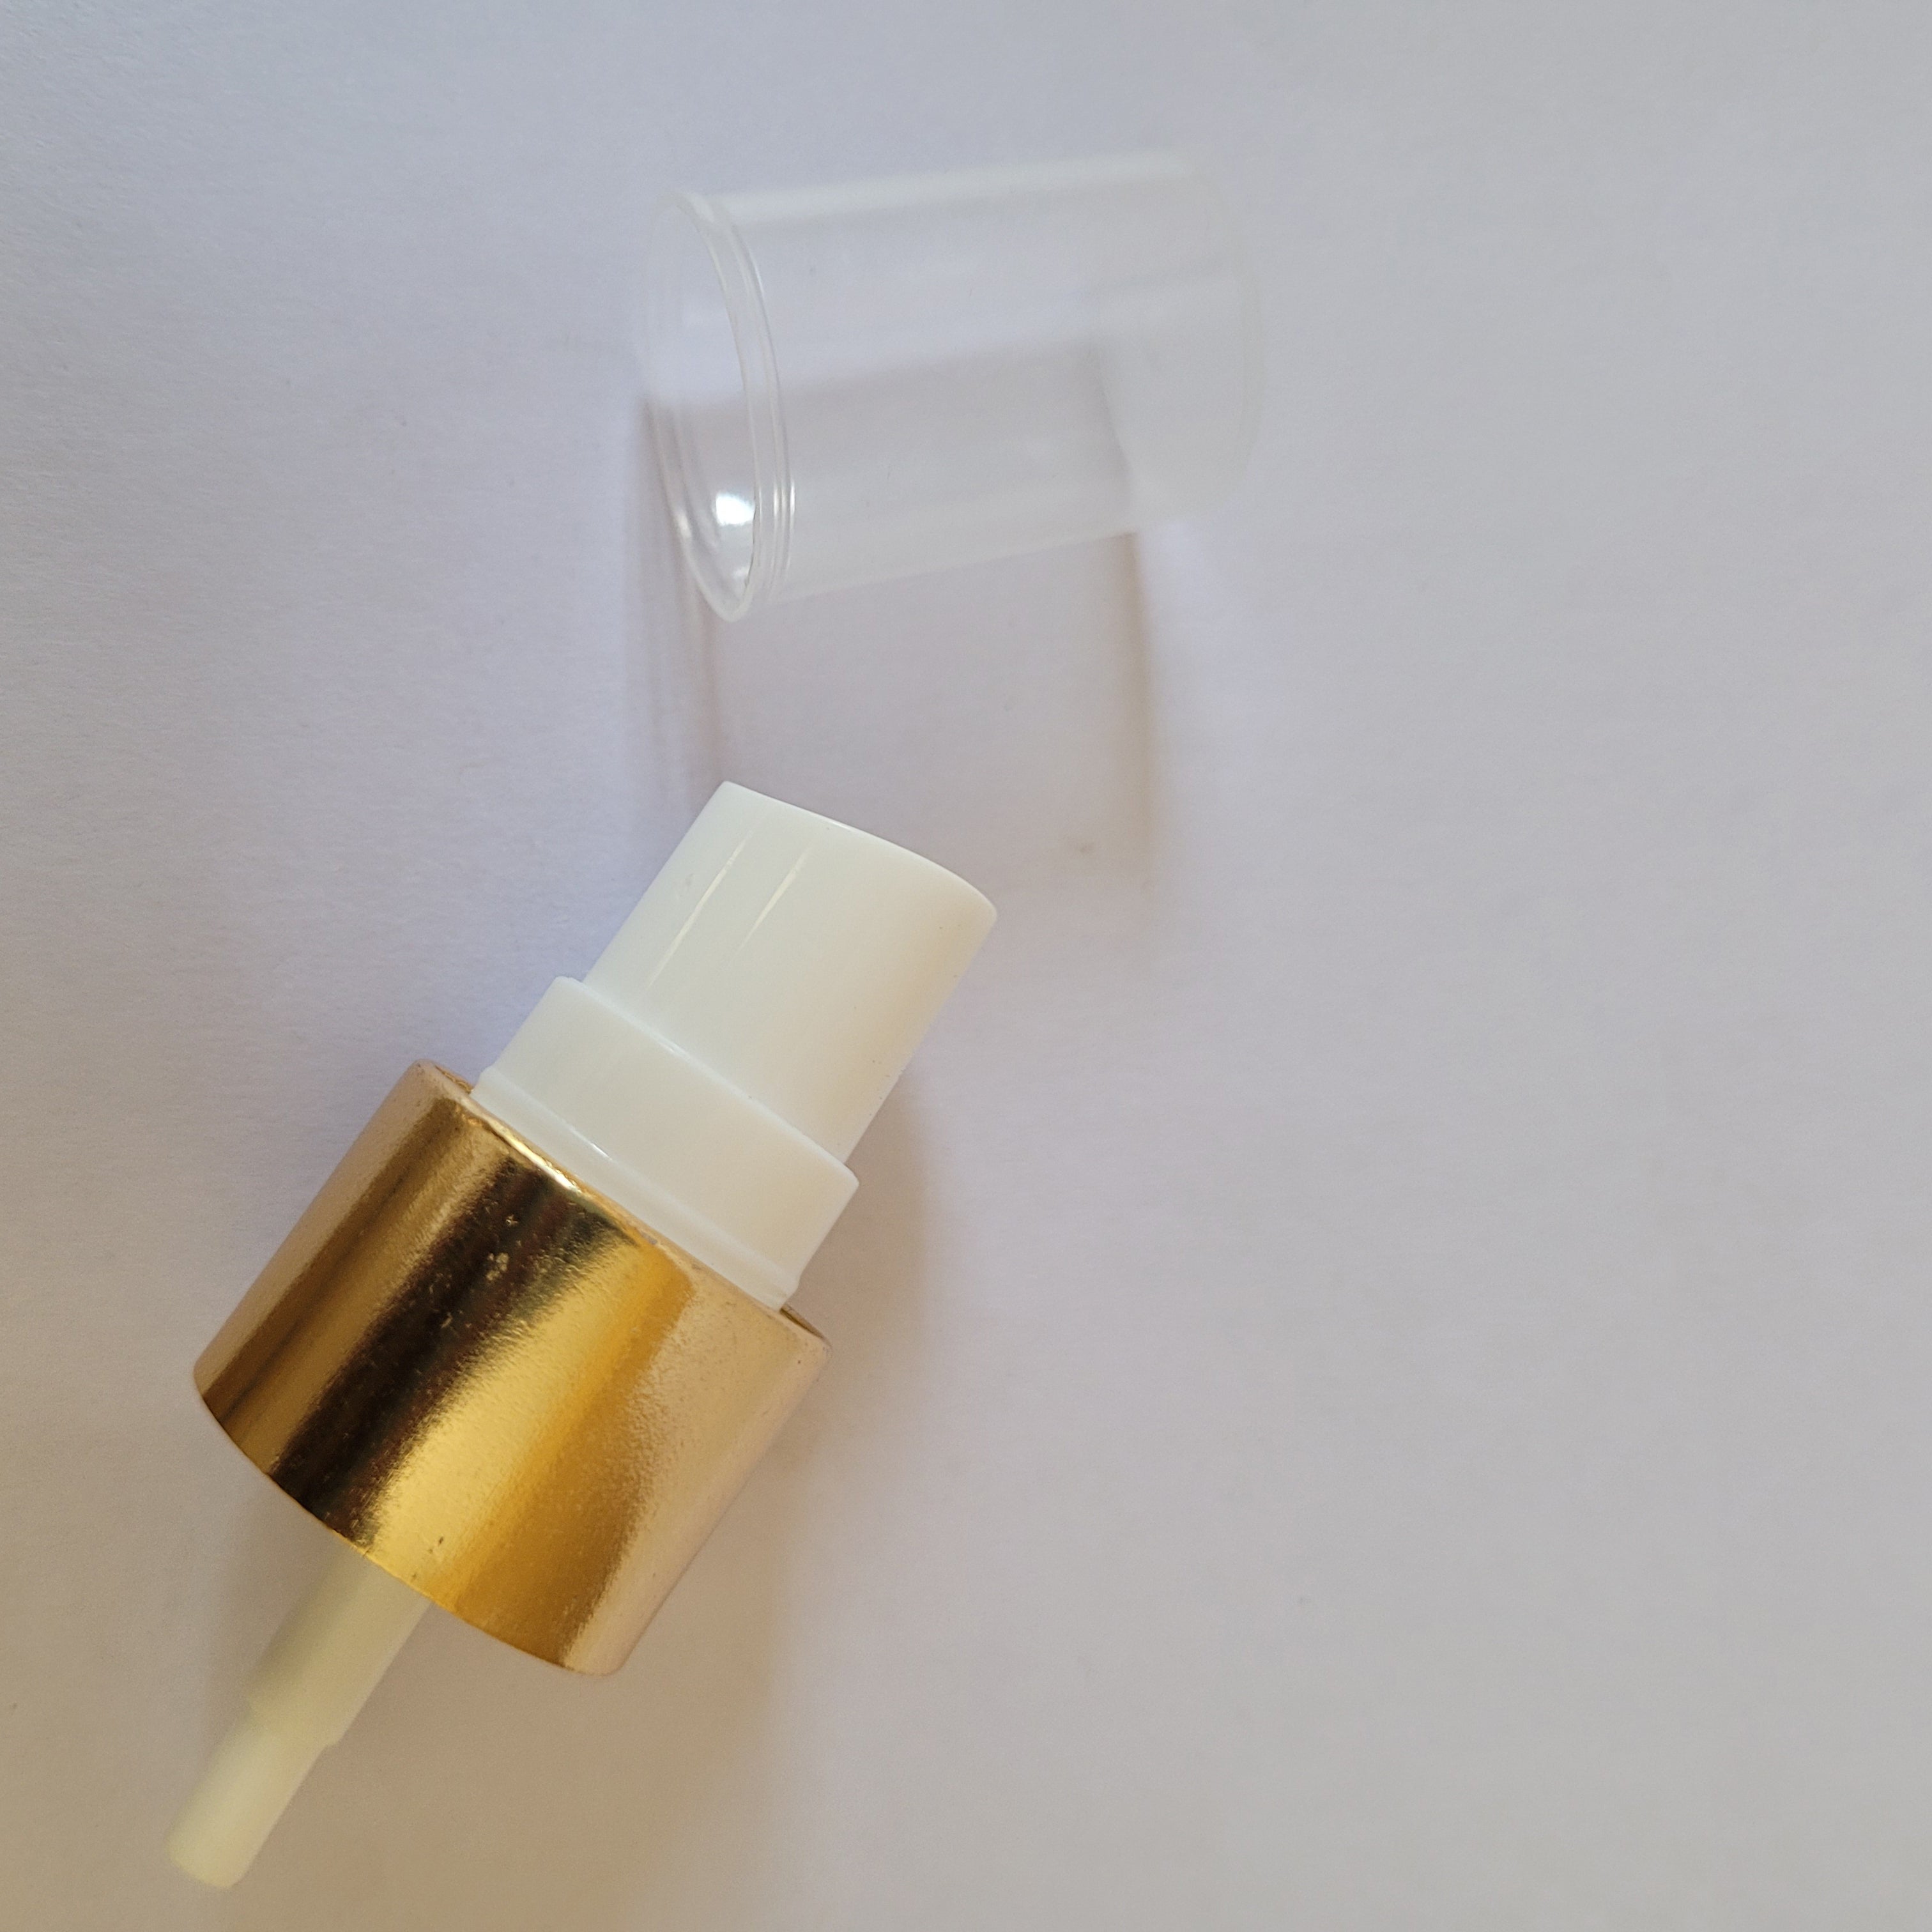 [ZMPC12] Gold Plated White color Mist Spray Pump with Transparent cap- 20mm & 24mm Neck